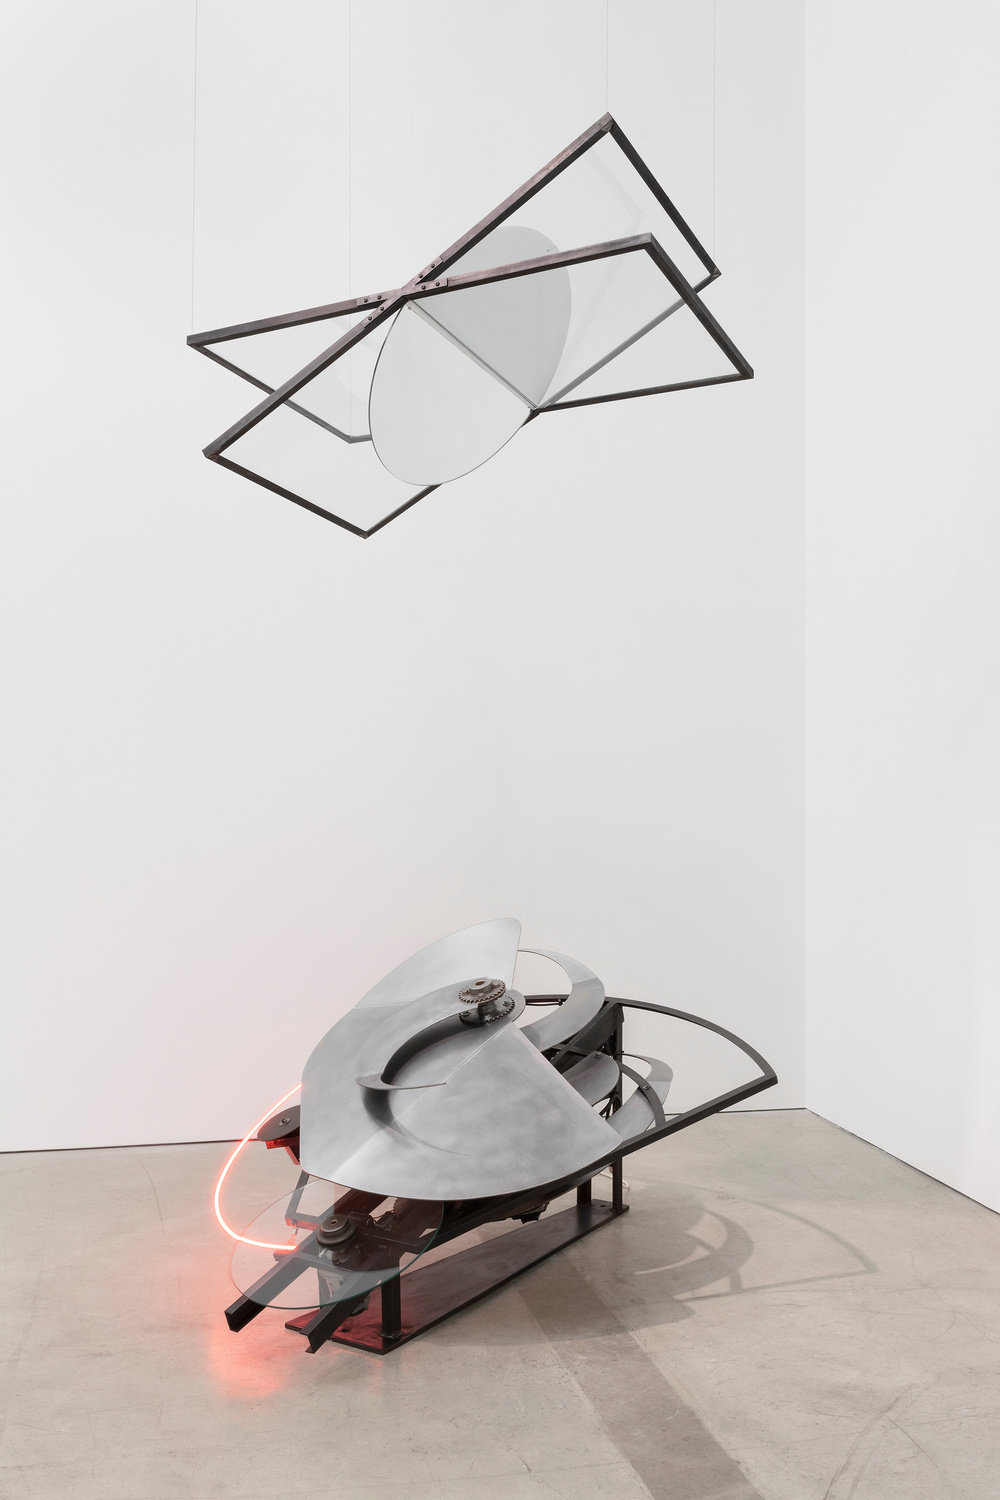 A kinetic sculpture with a neon strip by Alice Aycock